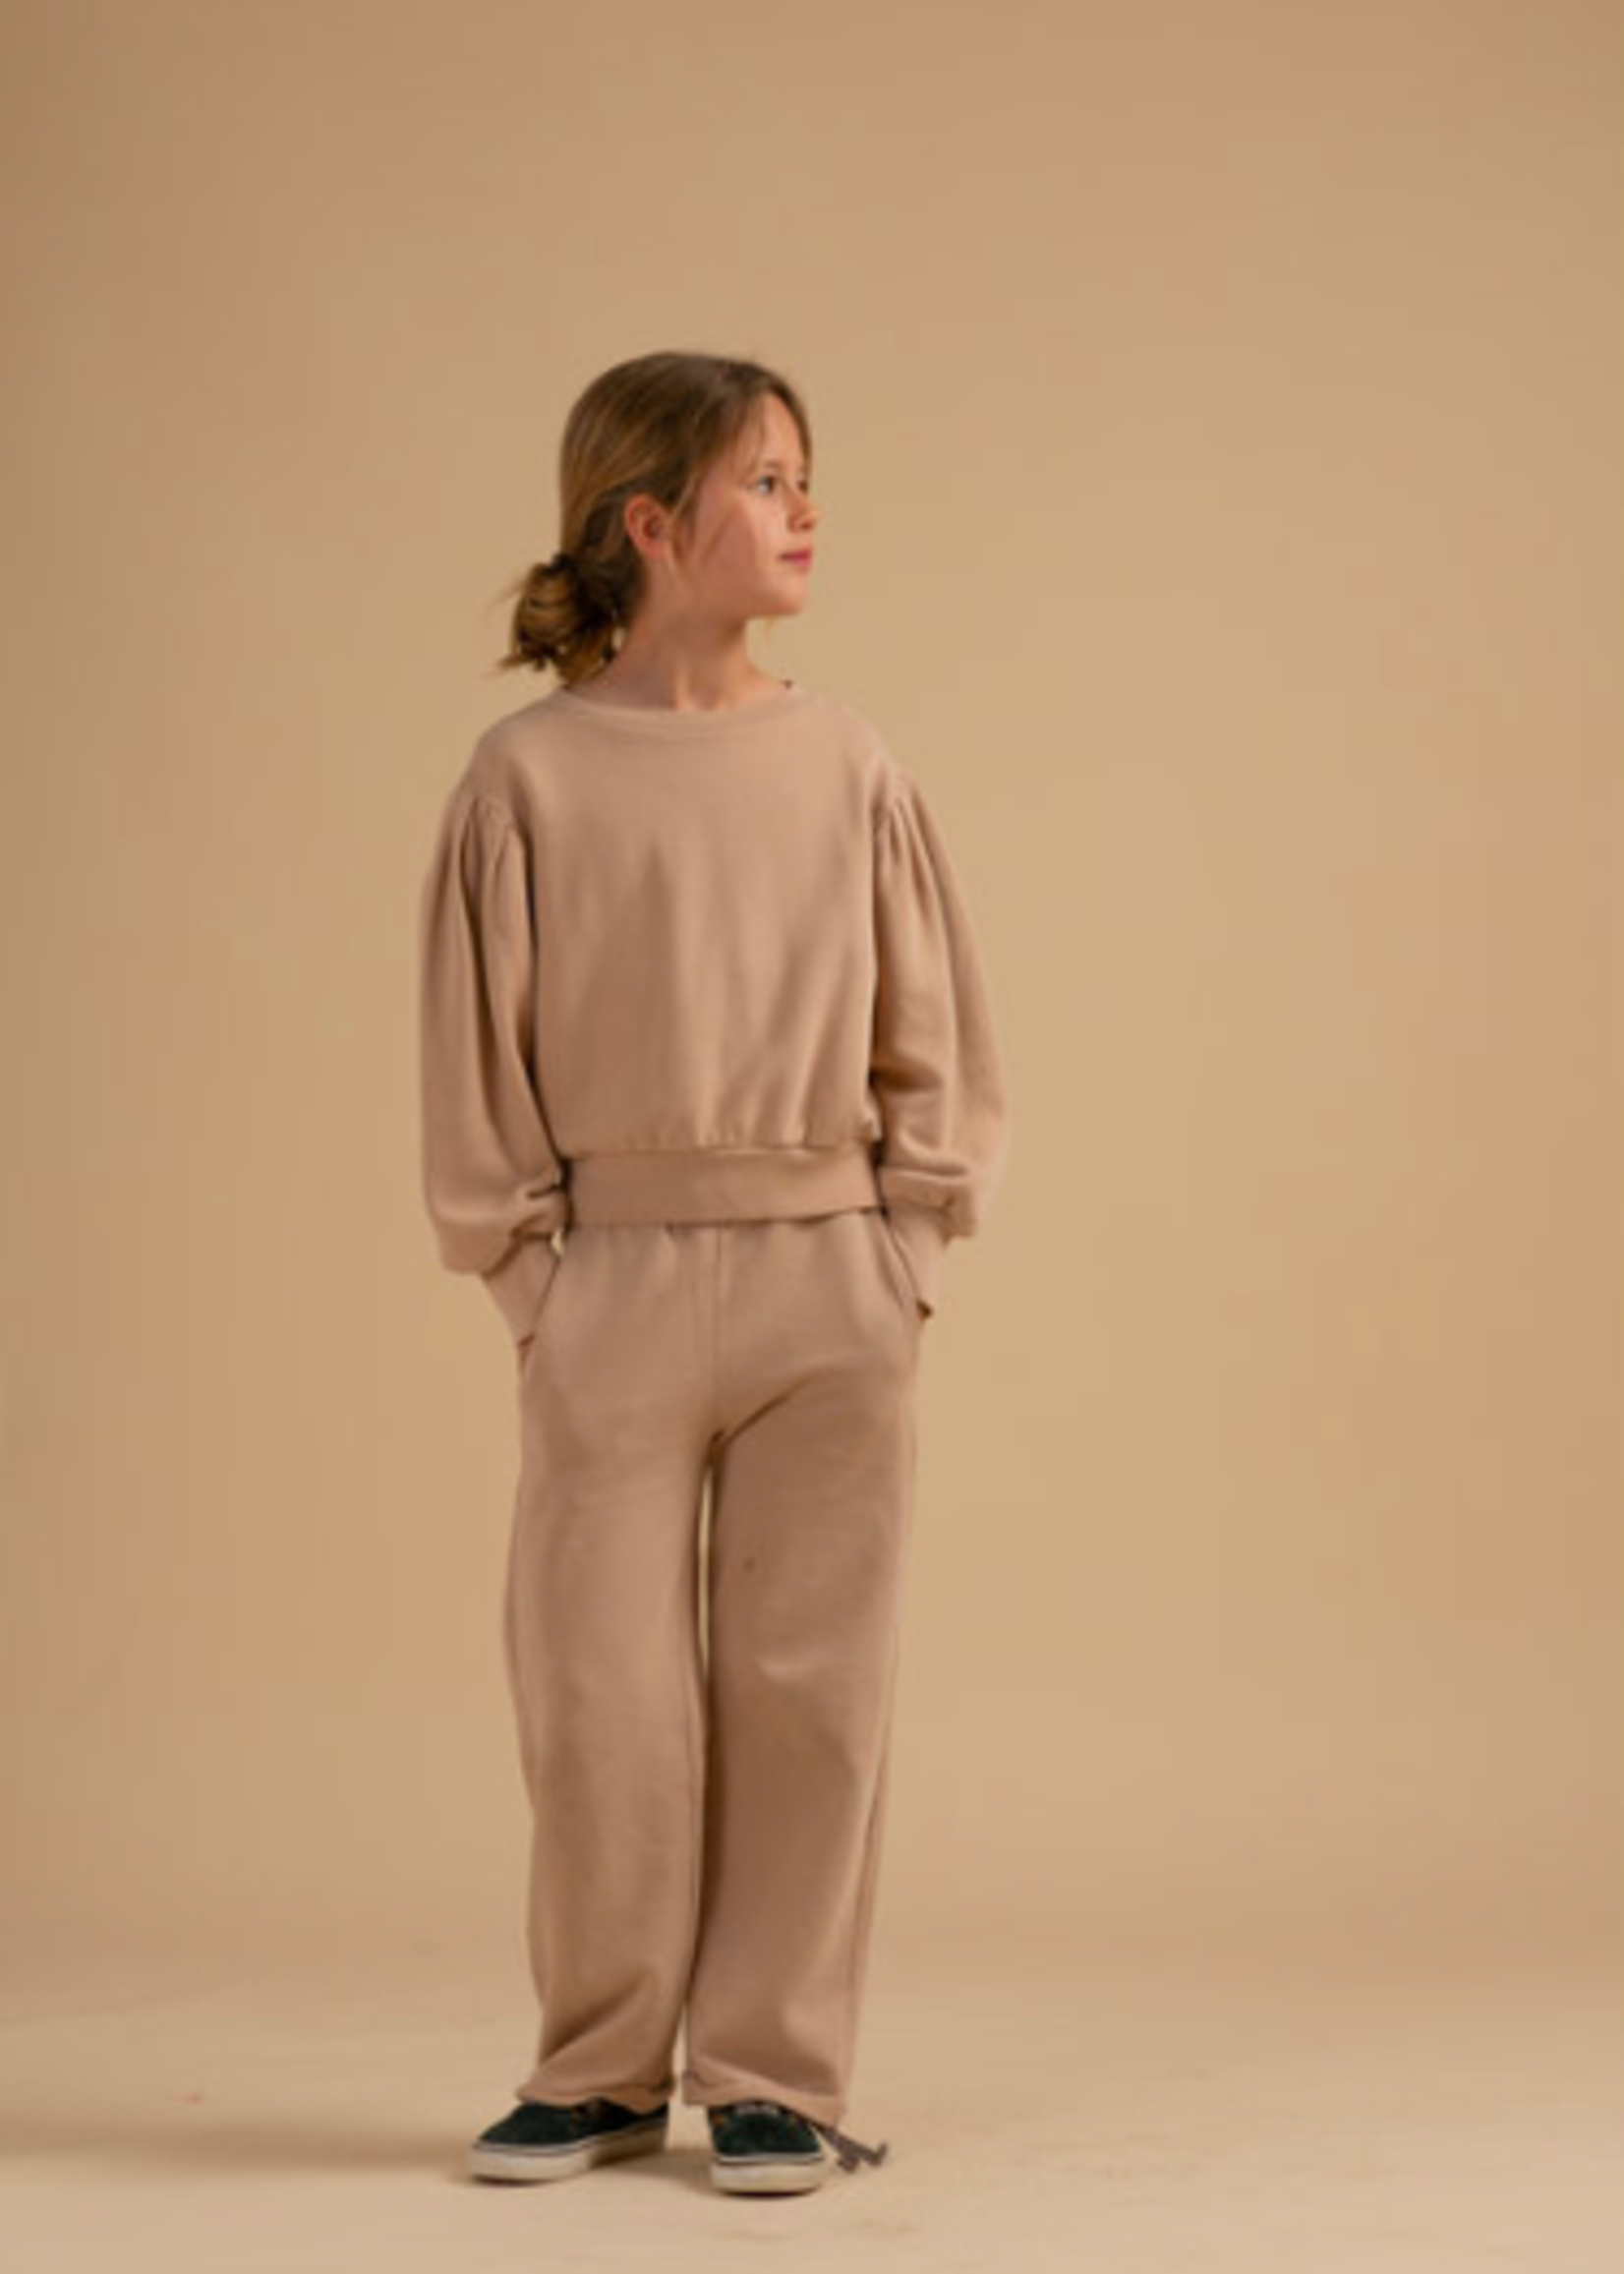 Long Live The Queen Sand puffy sleeve sweater 4-6y